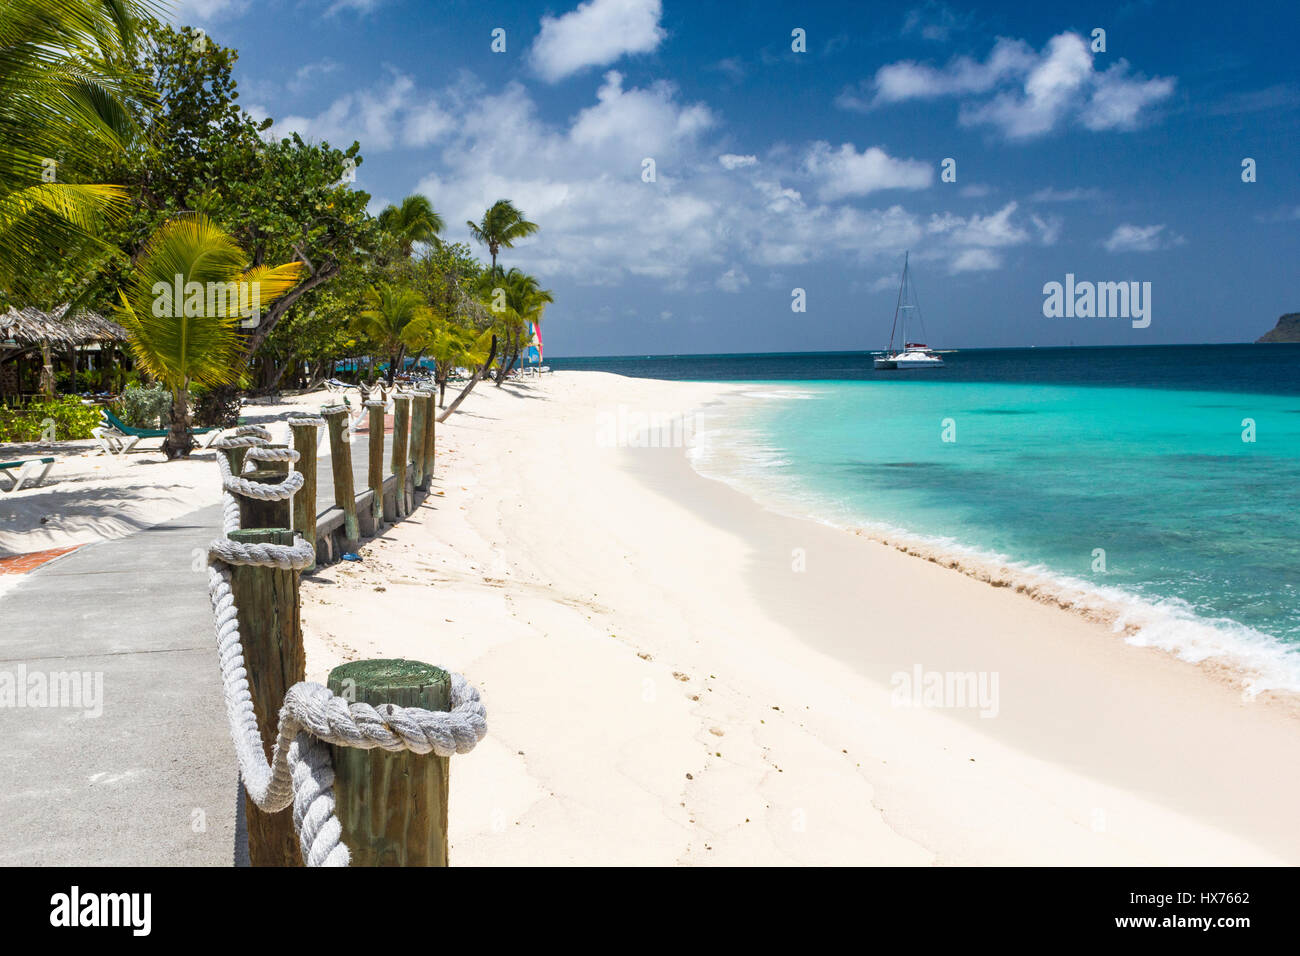 Palm Tree Fringe, with Beach and Caribbean Ocean View: Palm Island, Saint Vincent and the Grenadines, Stock Photo